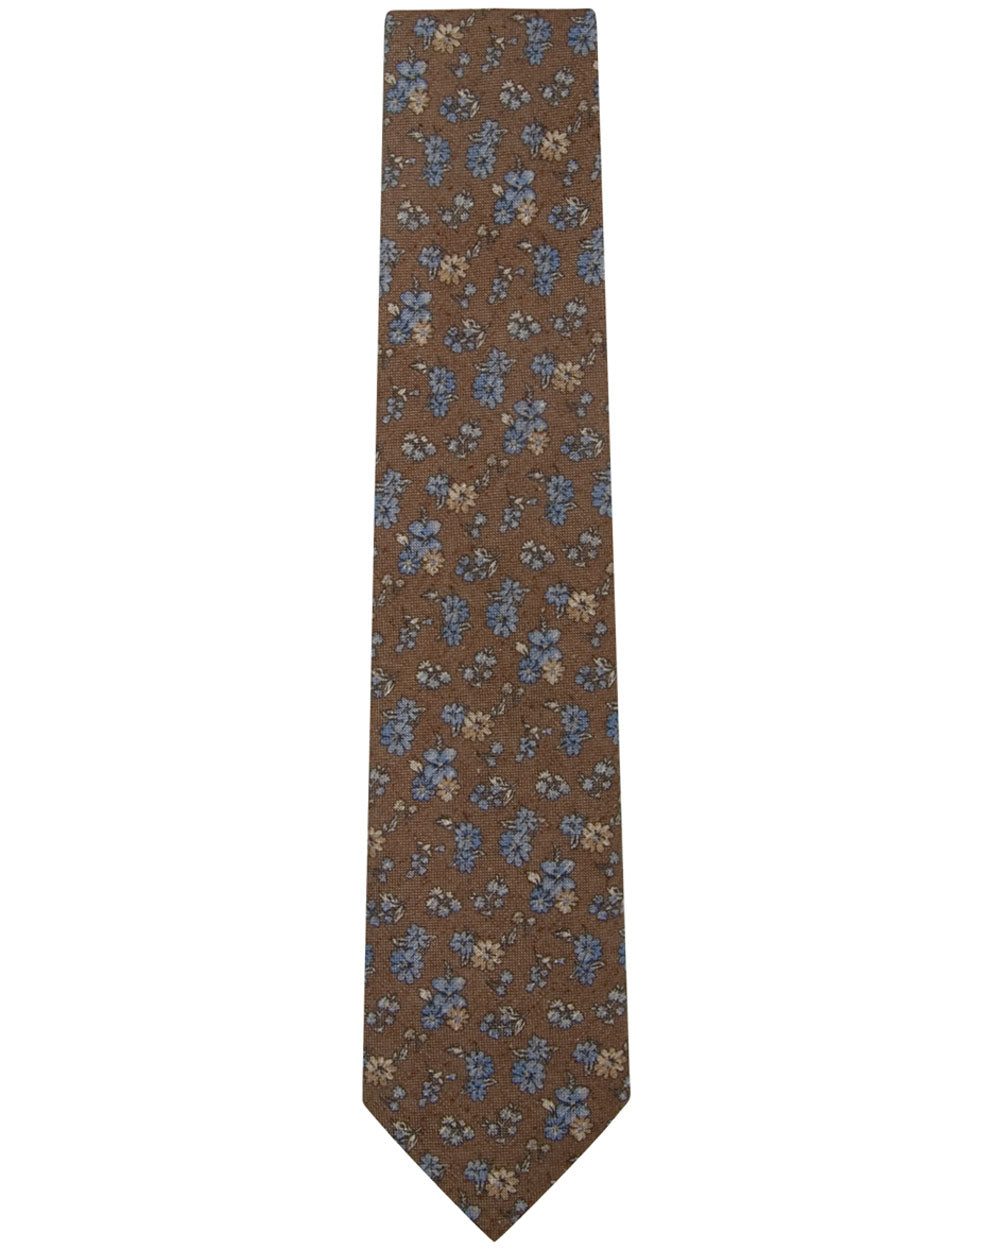 Brown and Blue Floral Tie